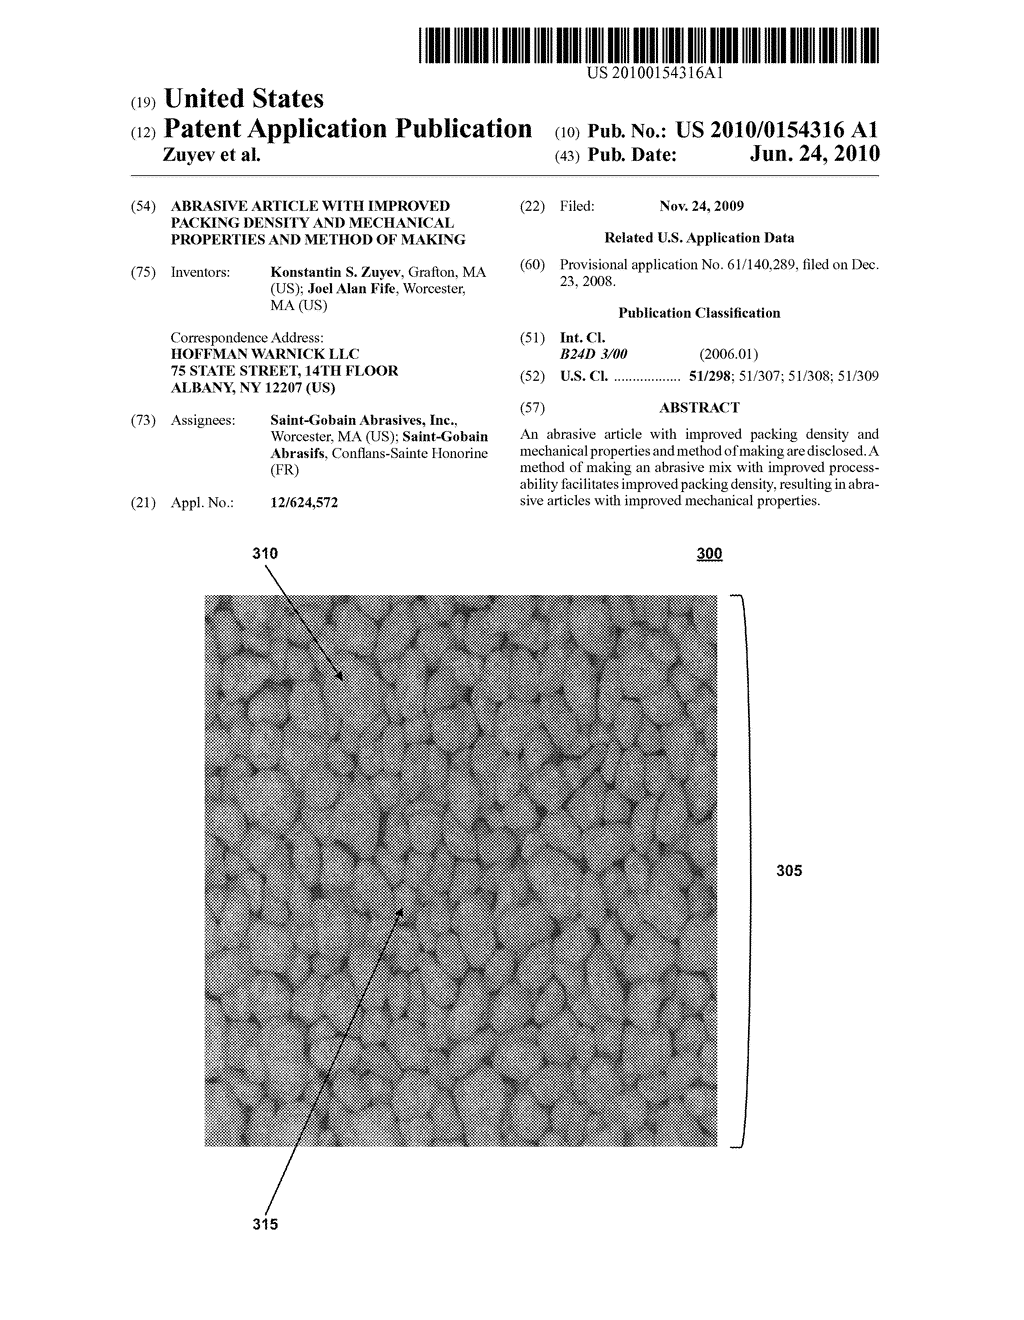 ABRASIVE ARTICLE WITH IMPROVED PACKING DENSITY AND MECHANICAL PROPERTIES AND METHOD OF MAKING - diagram, schematic, and image 01